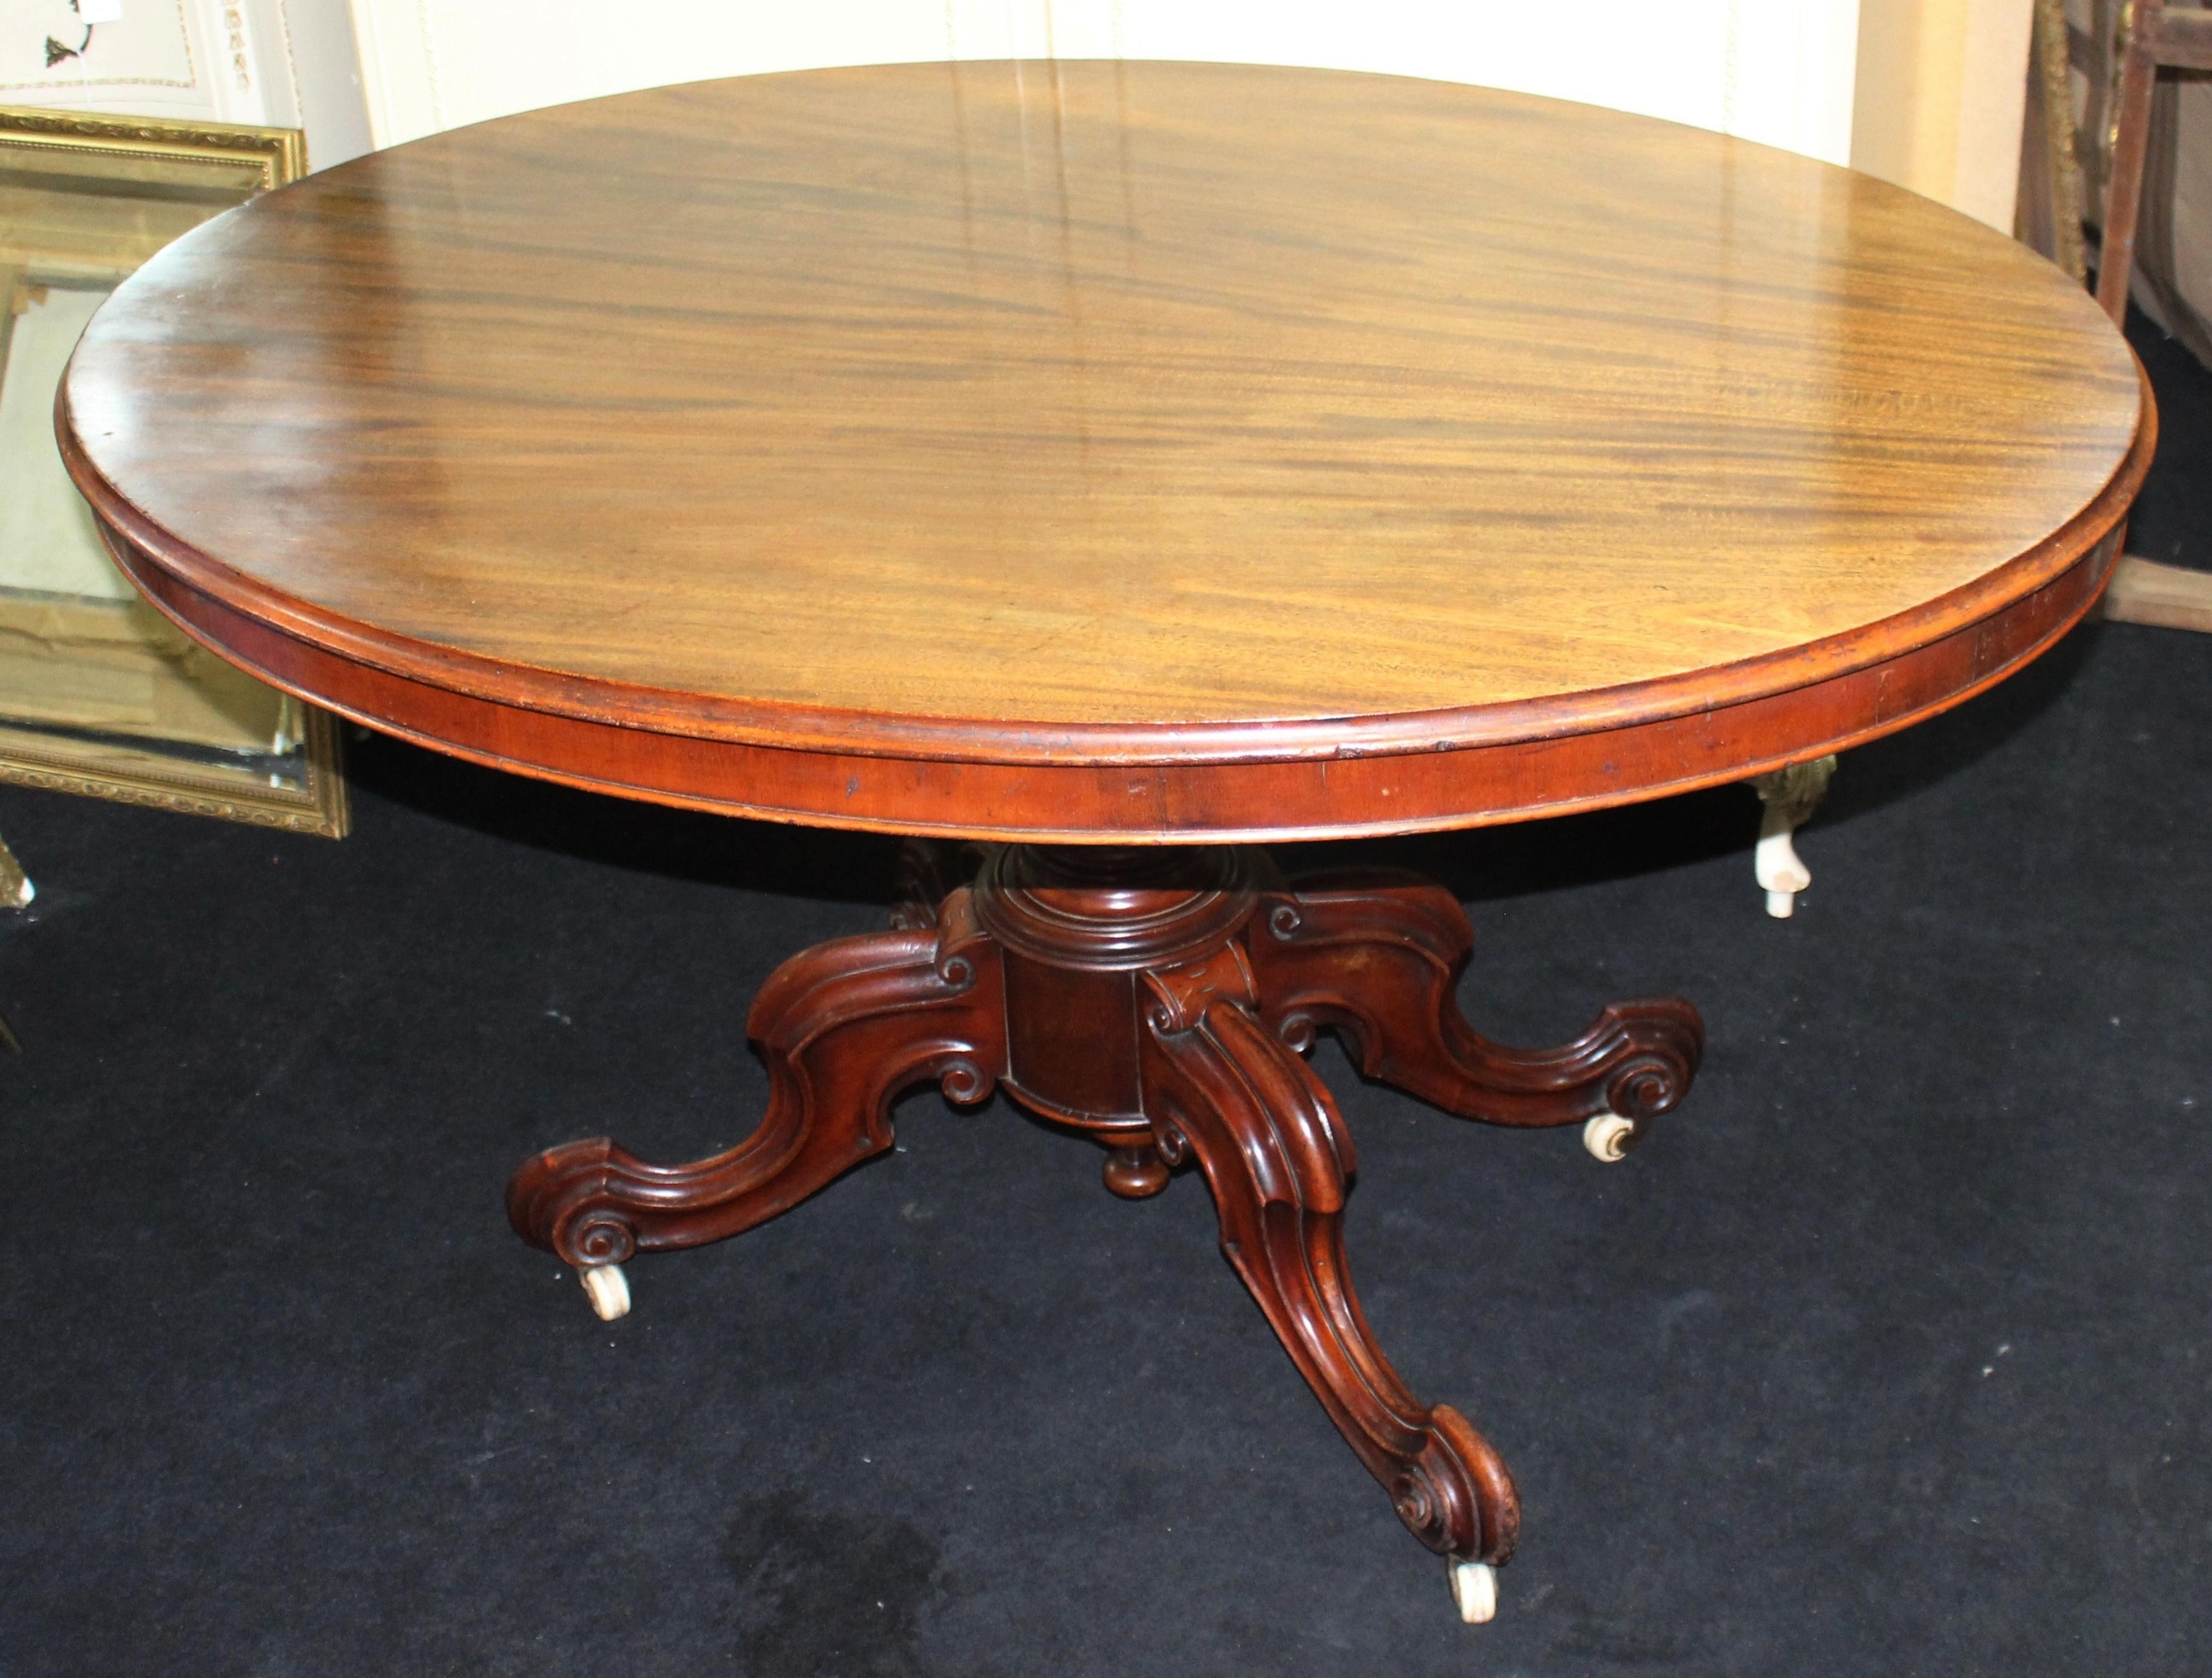 Mahogany late 19th c. oval table
 

Top 128 x 95 cm 20 1/2 x 37 1/2 in

Height 74 cm 29in


Mid/late Victorian, English

Mahogany

A few marks to wood commensurate with age. Some 'wobble' to base 
 

Nice quality Victorian oval